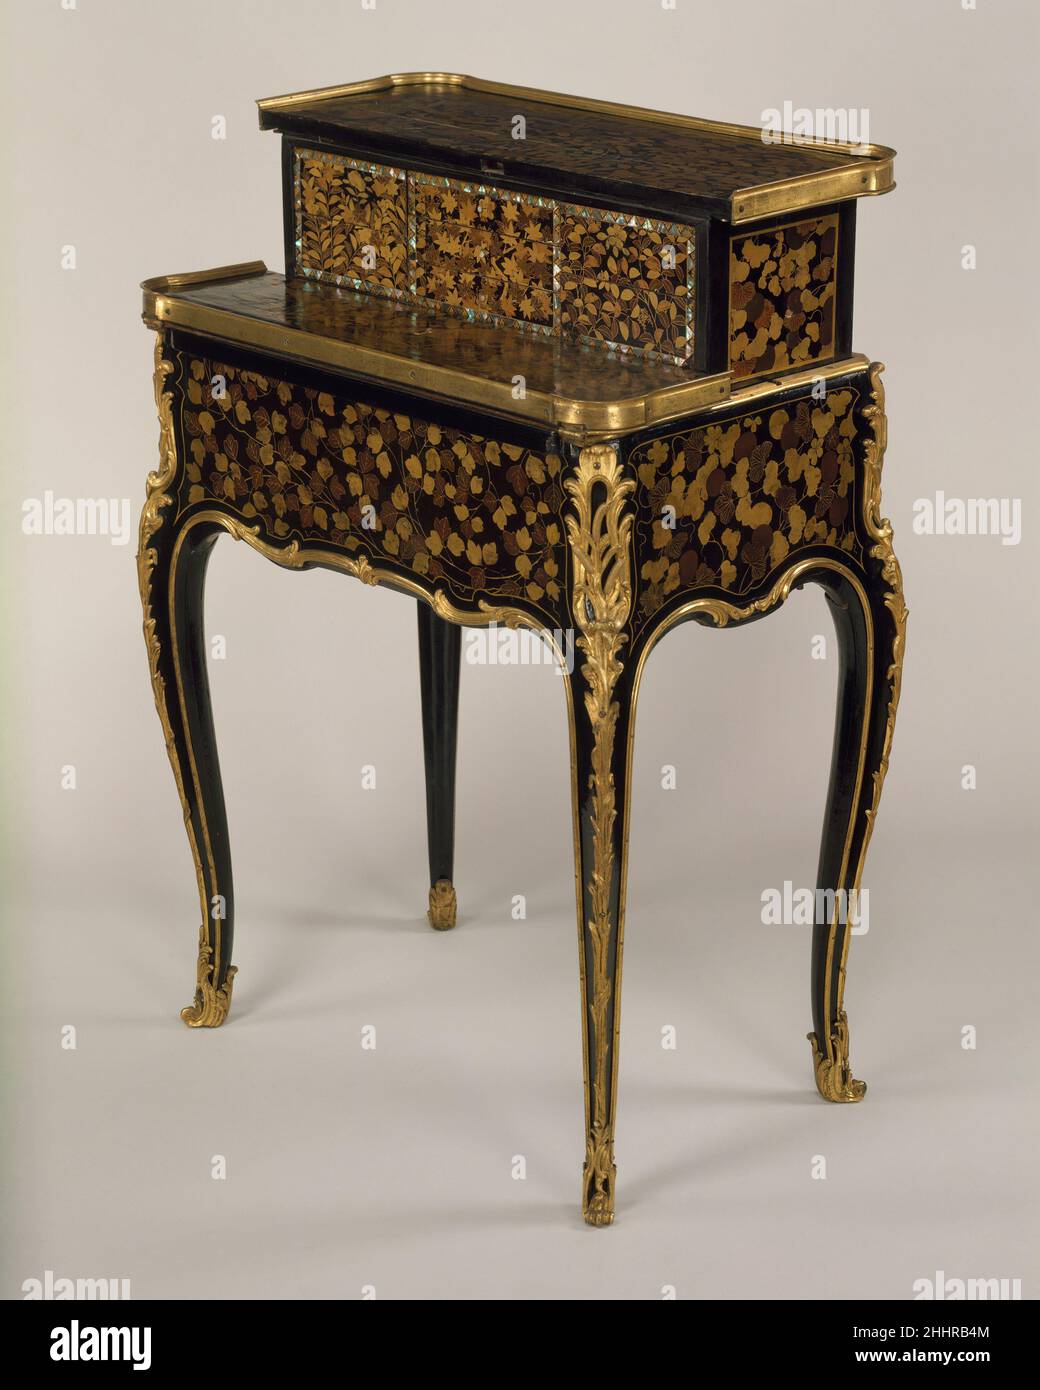 Mechanical table à la Bourgogne ca. 1760 René Dubois Mechanical tables of varying degrees of complexity were popular from the mid-eighteenth century and were made by several prominent ébénistes, in particular Jean François Oeben and Jean Henri Riesener. This table, known as a table à la Bourgogne, is stamped R. DUBOIS and dates to ca. 1760. The elegant curves of the legs and lower edge are emphasized by the delicate mounts. These, in turn, are echoed by the fine gold line delineating the lacquer panels while the gilded mounts encasing the feet add further refinement.The front half of the top o Stock Photo